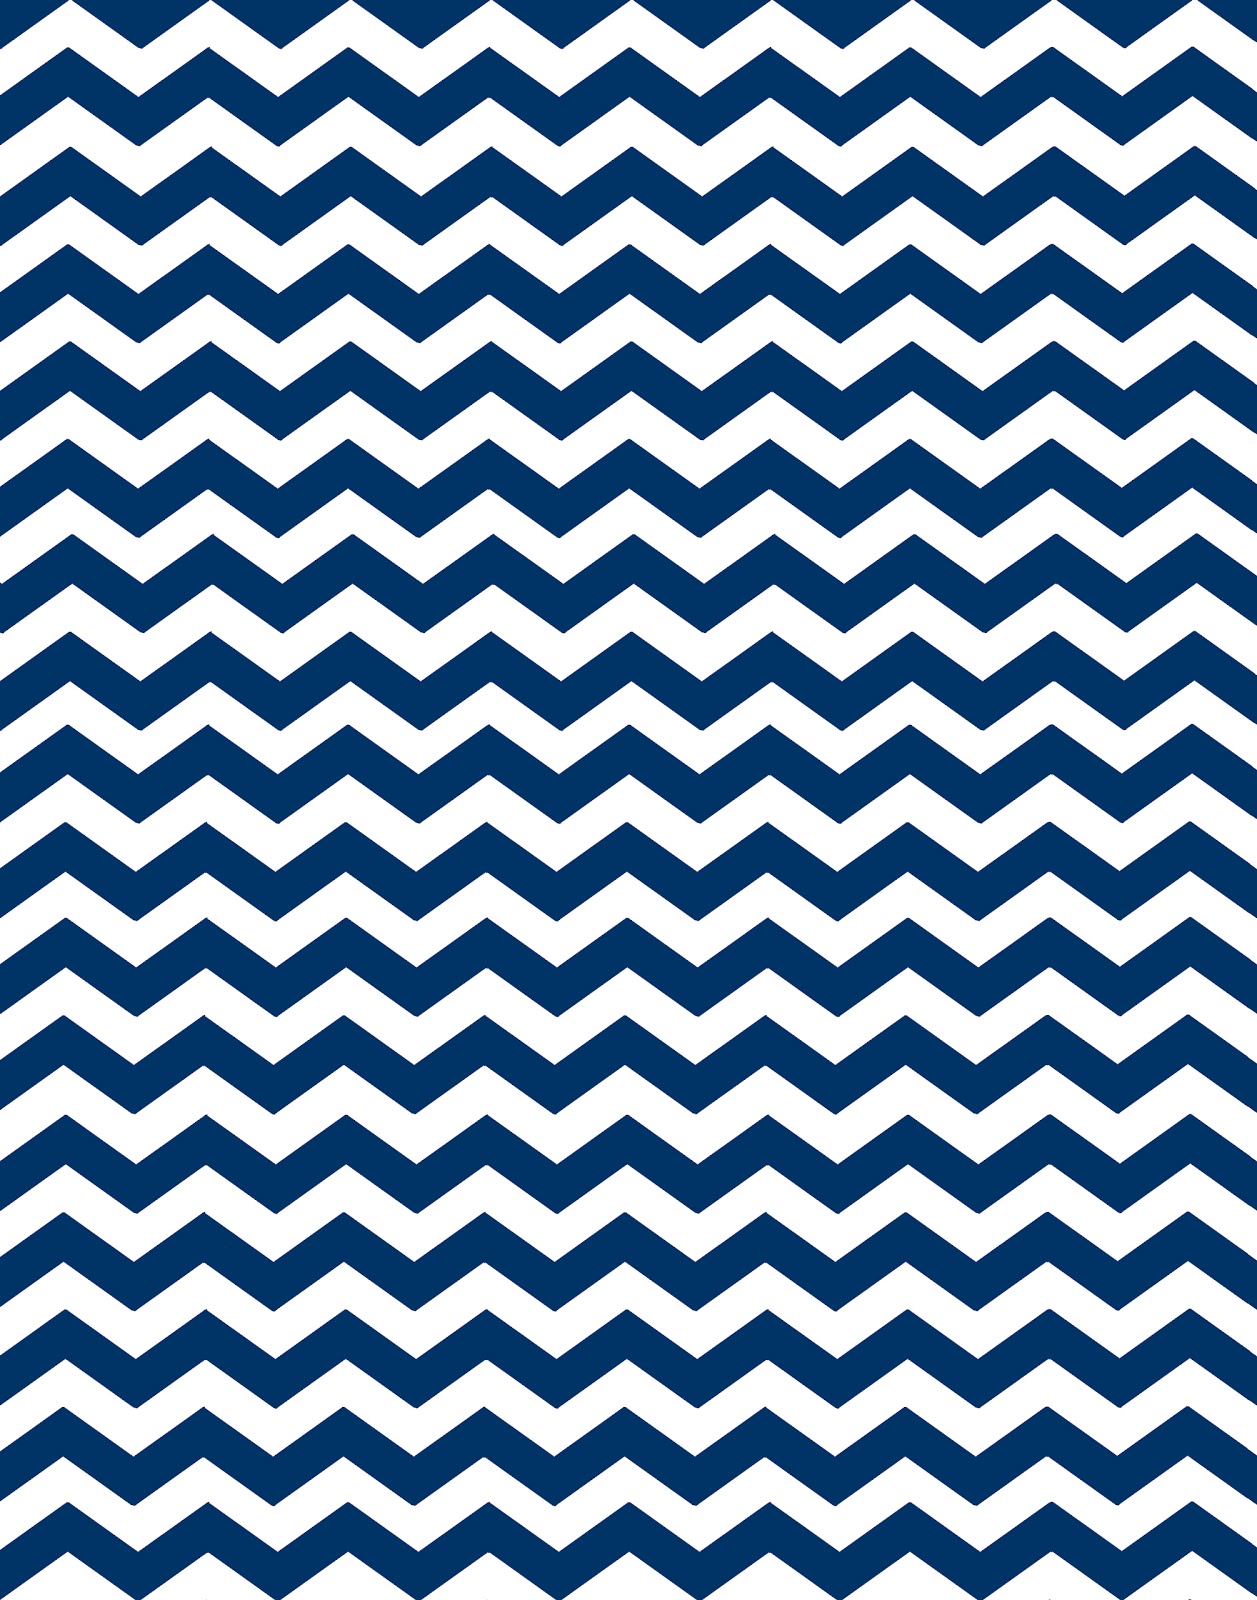 Blue Chevron Background Images Browse 149630 Stock Photos  Vectors Free  Download with Trial  Shutterstock